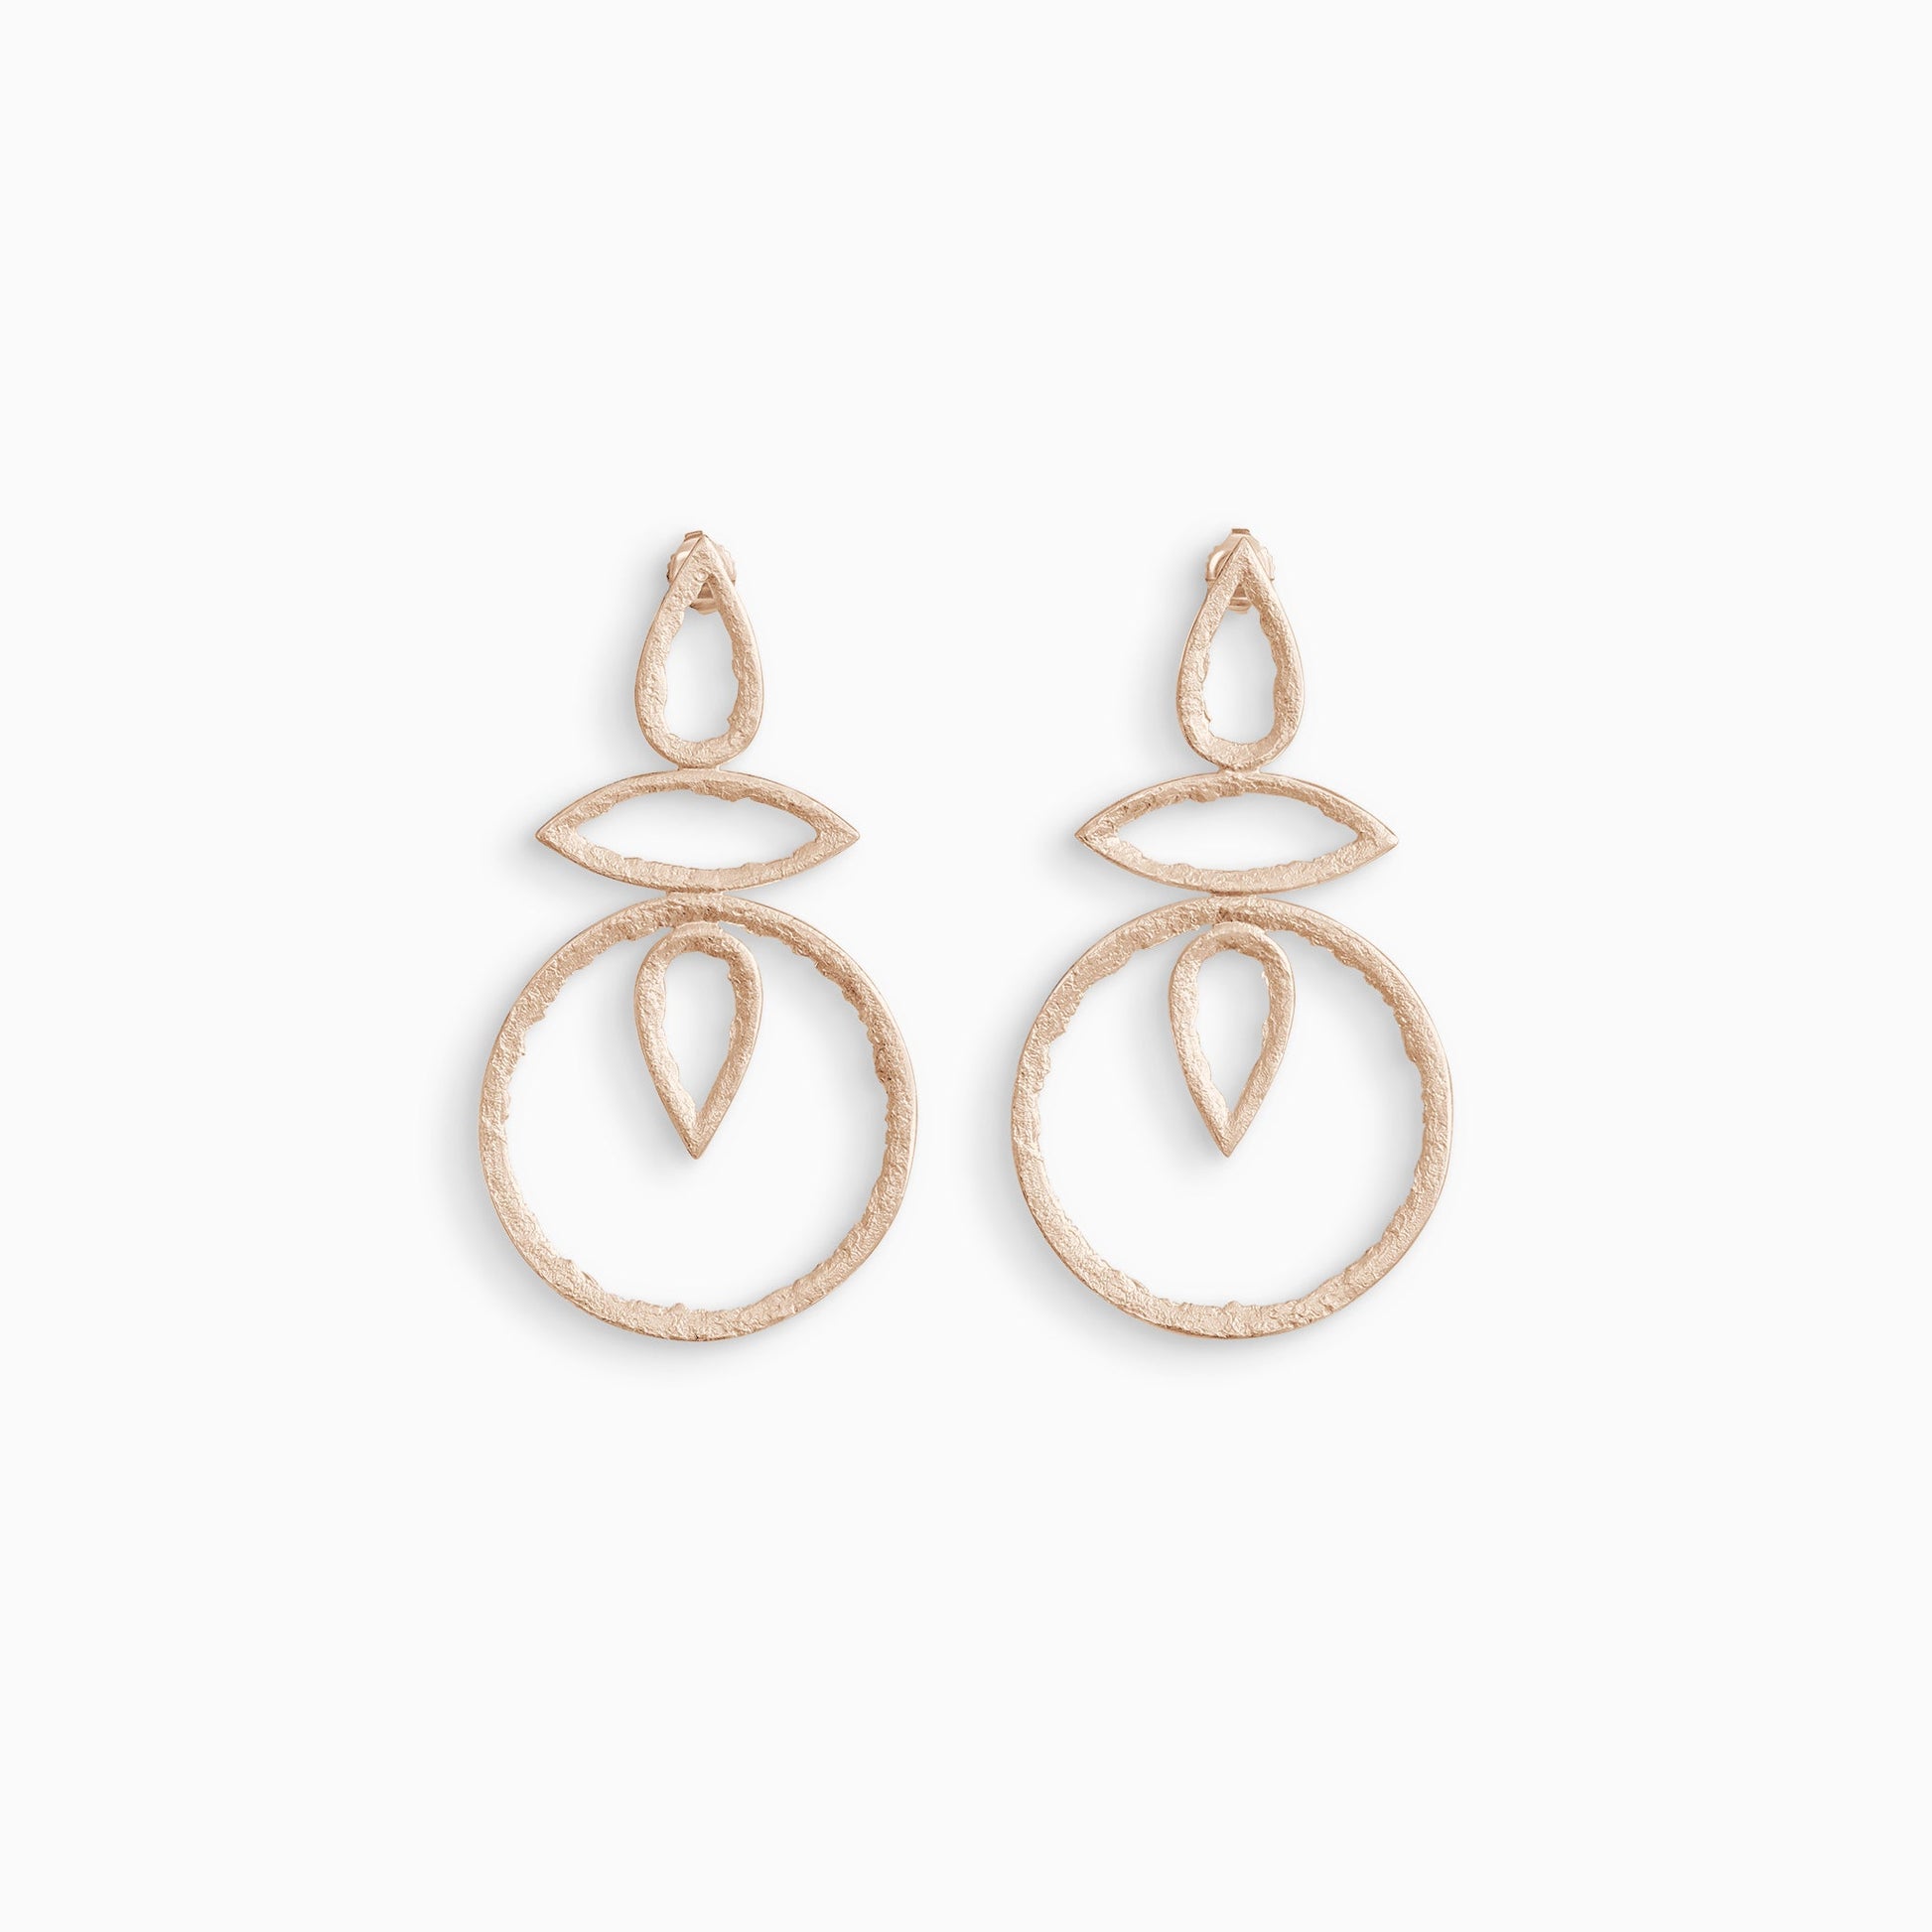 A large pair of 18ct Fairtrade rose gold drop earrings with a stud ear fitting. A teardrop shape connects a lozenge shape to a circle in a line. Another teardrop shape in reverse is inside the circle. These open strongly textured shapes have smooth outside edges and fragmented inside edges. 46mm x 26mm.